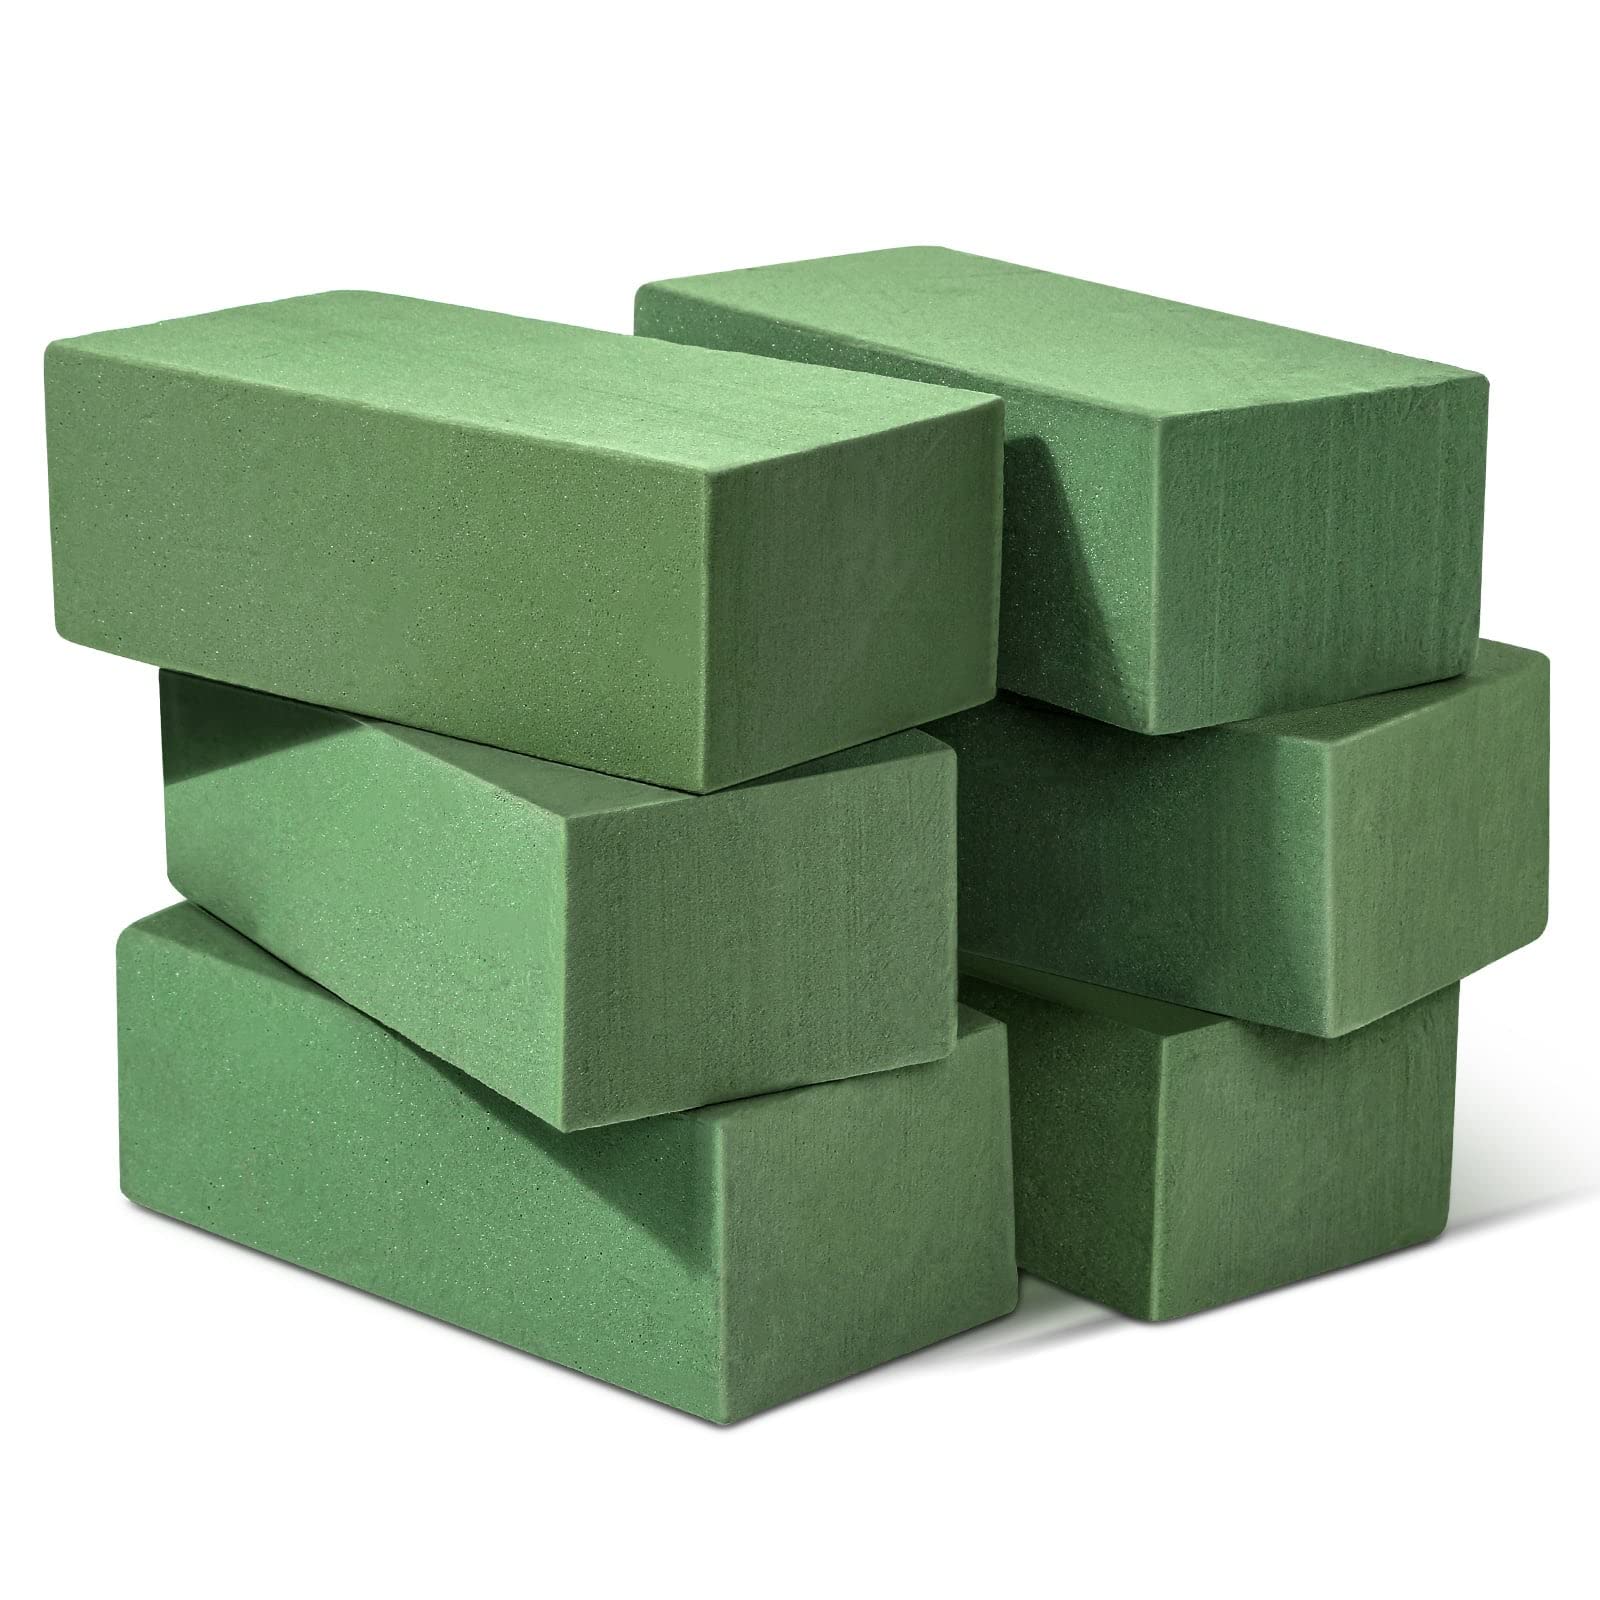 6 Pcs Floral Foam Blocks for Flower Arrangement (Larger Size 9 L x 4.3 W x  3 H) Wet and Dry Green Floral Foam for Wedding, Birthdays, Home Decorations